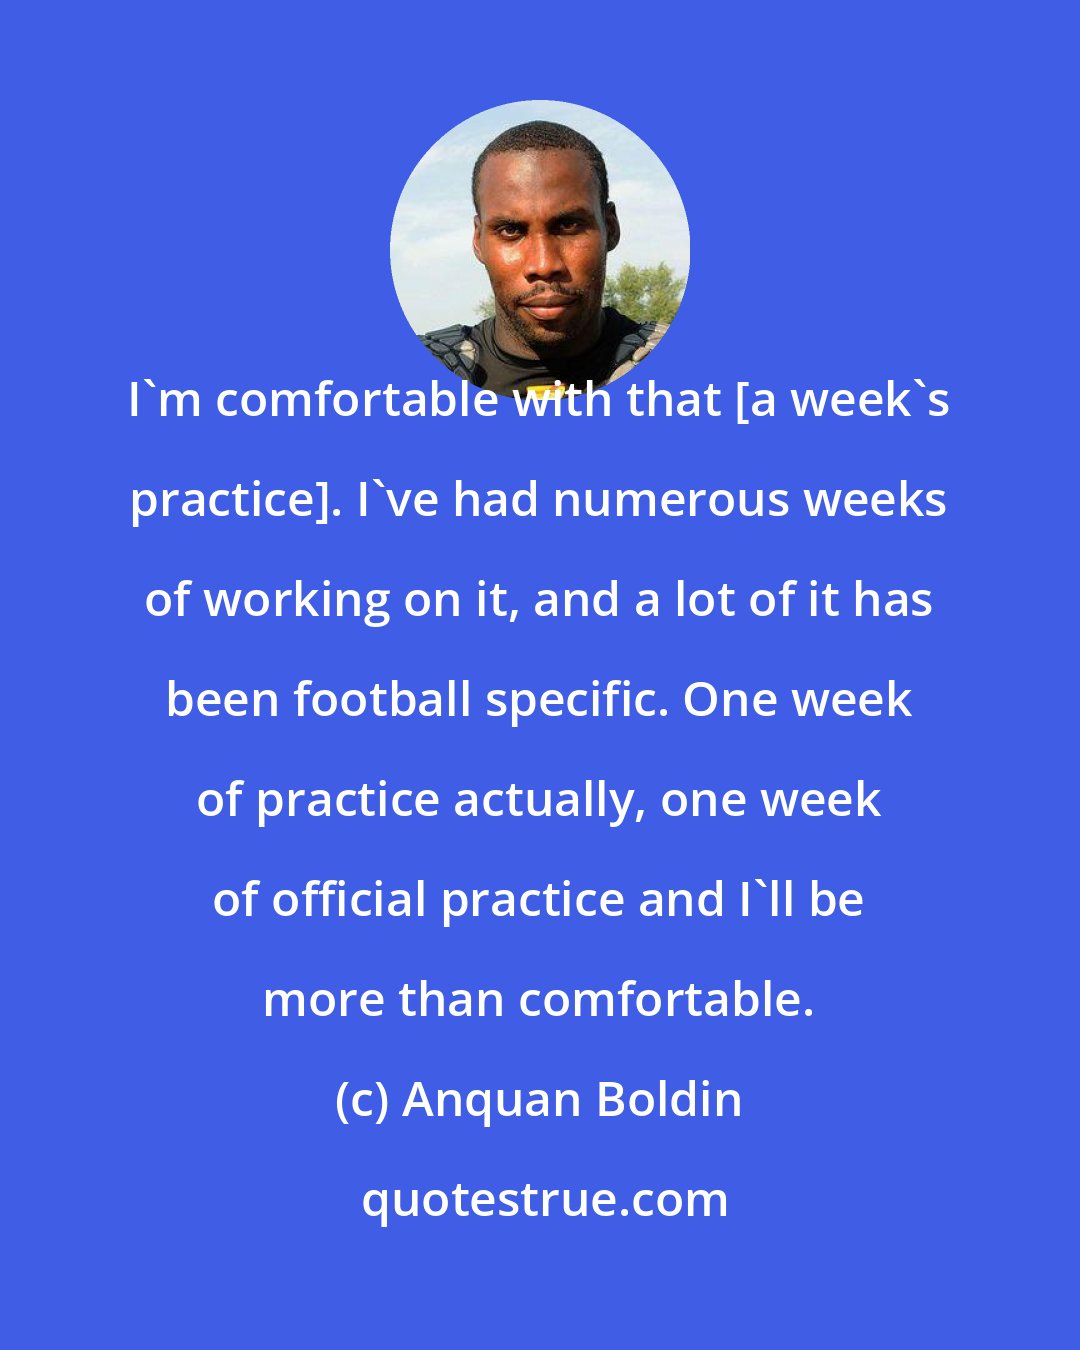 Anquan Boldin: I'm comfortable with that [a week's practice]. I've had numerous weeks of working on it, and a lot of it has been football specific. One week of practice actually, one week of official practice and I'll be more than comfortable.